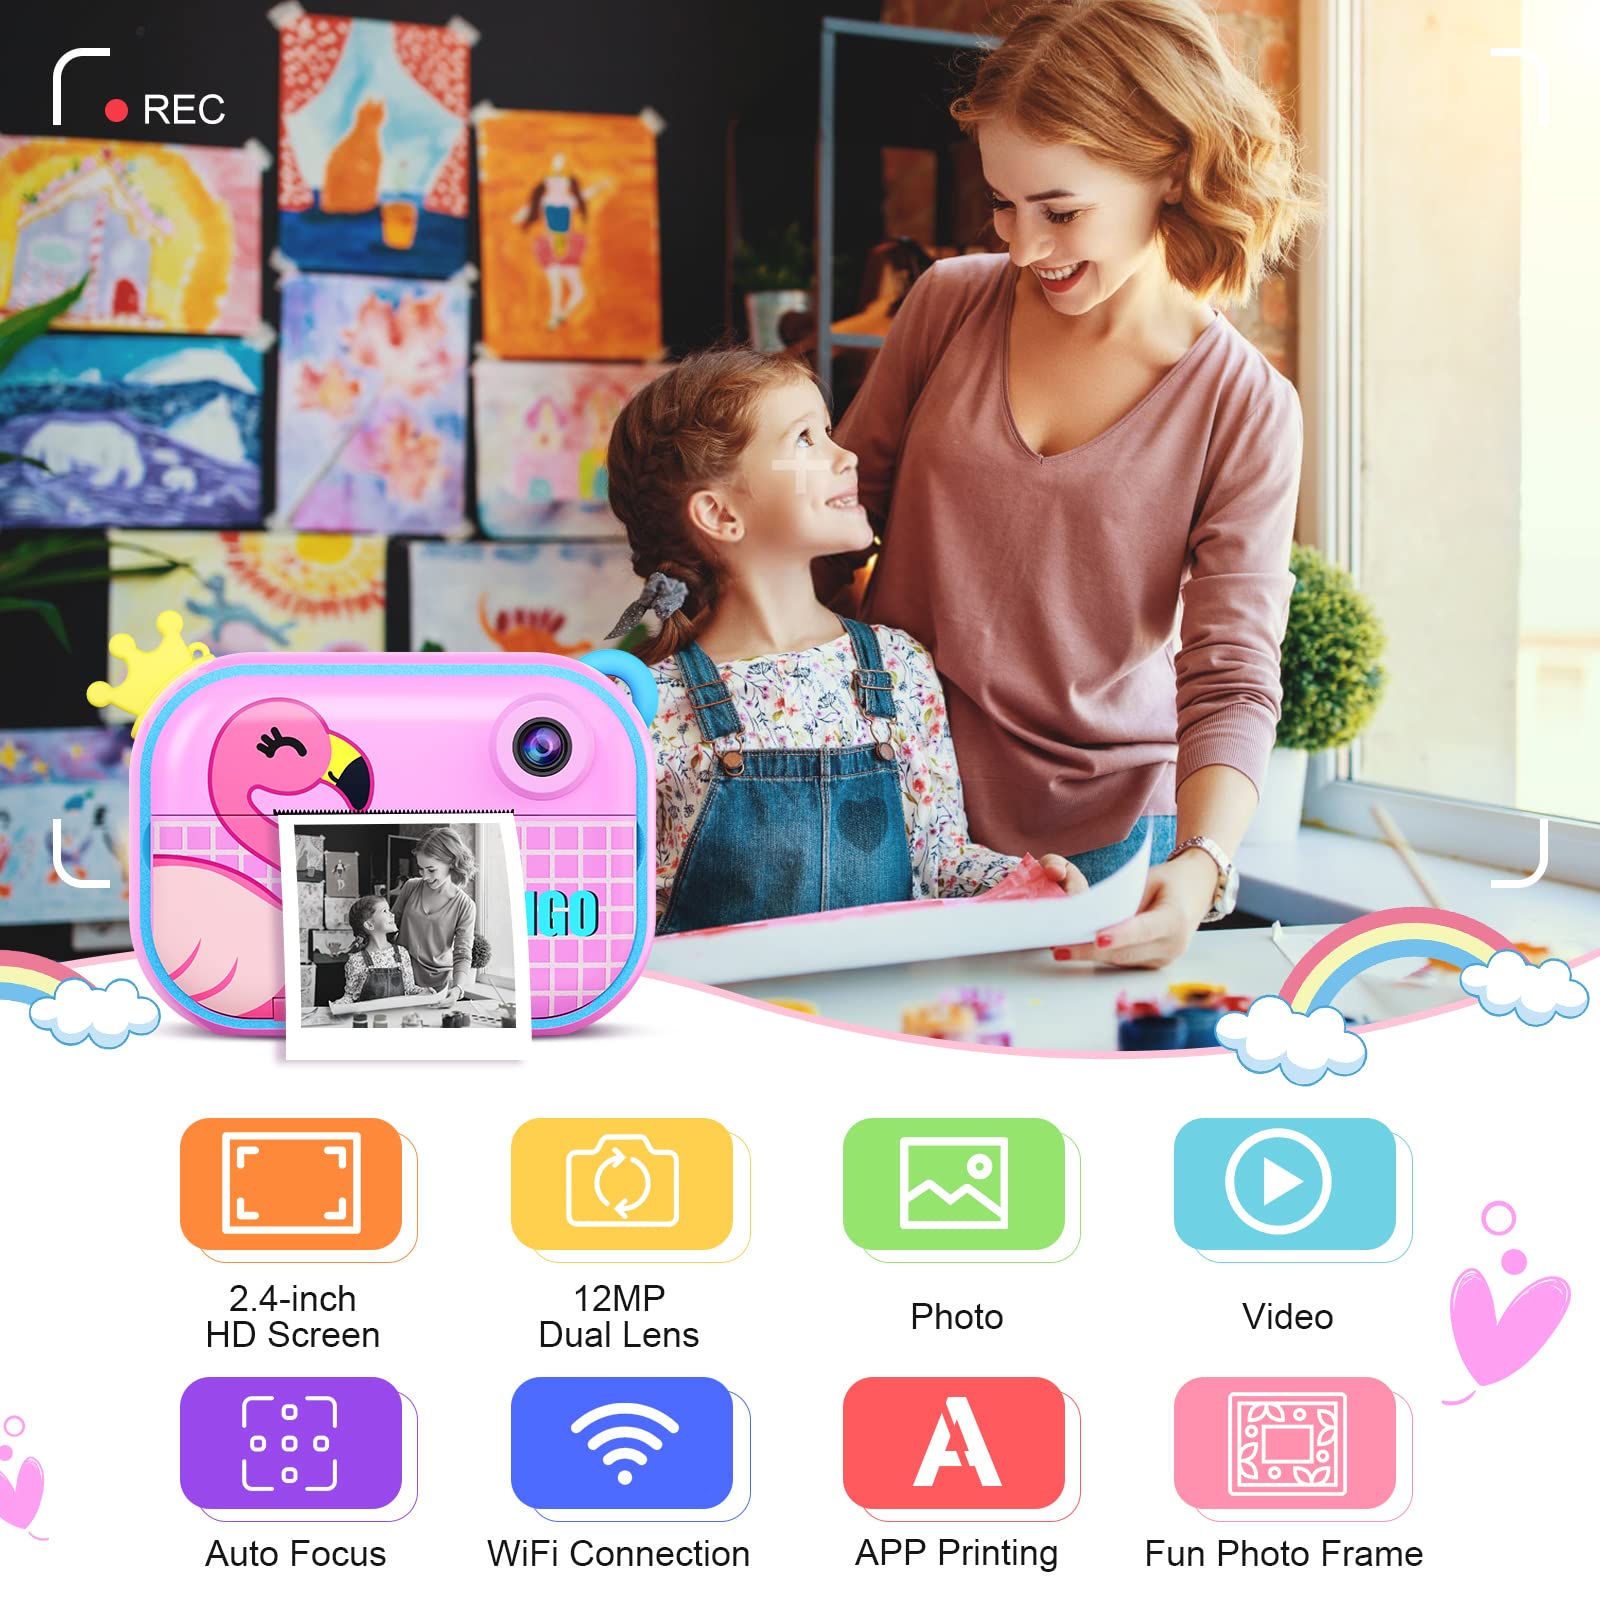 Instant Print Camera for Kids,Zero Ink Kids Camera with Print Paper,Selfie Video Digital Camera with HD 1080P 2.4 Inch IPS Screen,3-14 Years Old Children Toy Learning Camera for Birthday,Chistmas